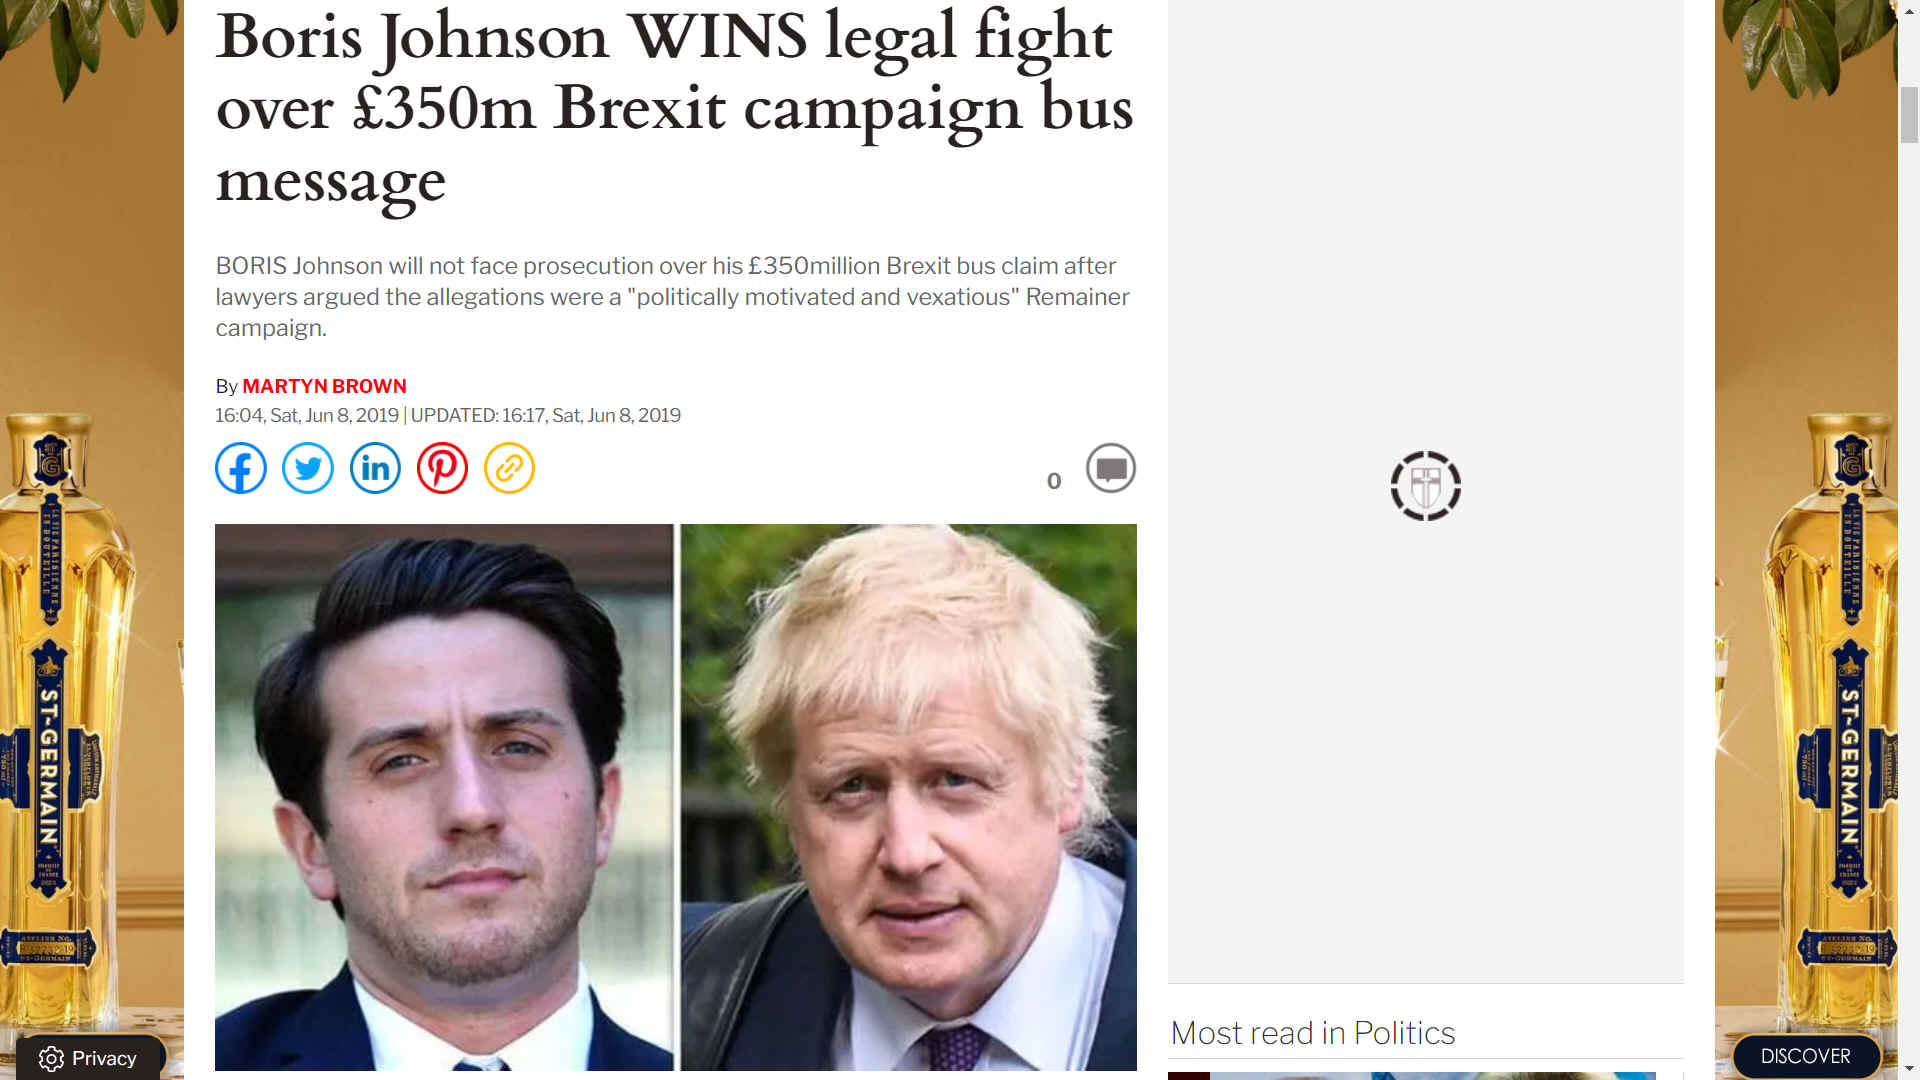 Boris Johnson wins legal fight in High Court, giving him freedom to case Covid 19 deaths by criminal negligence